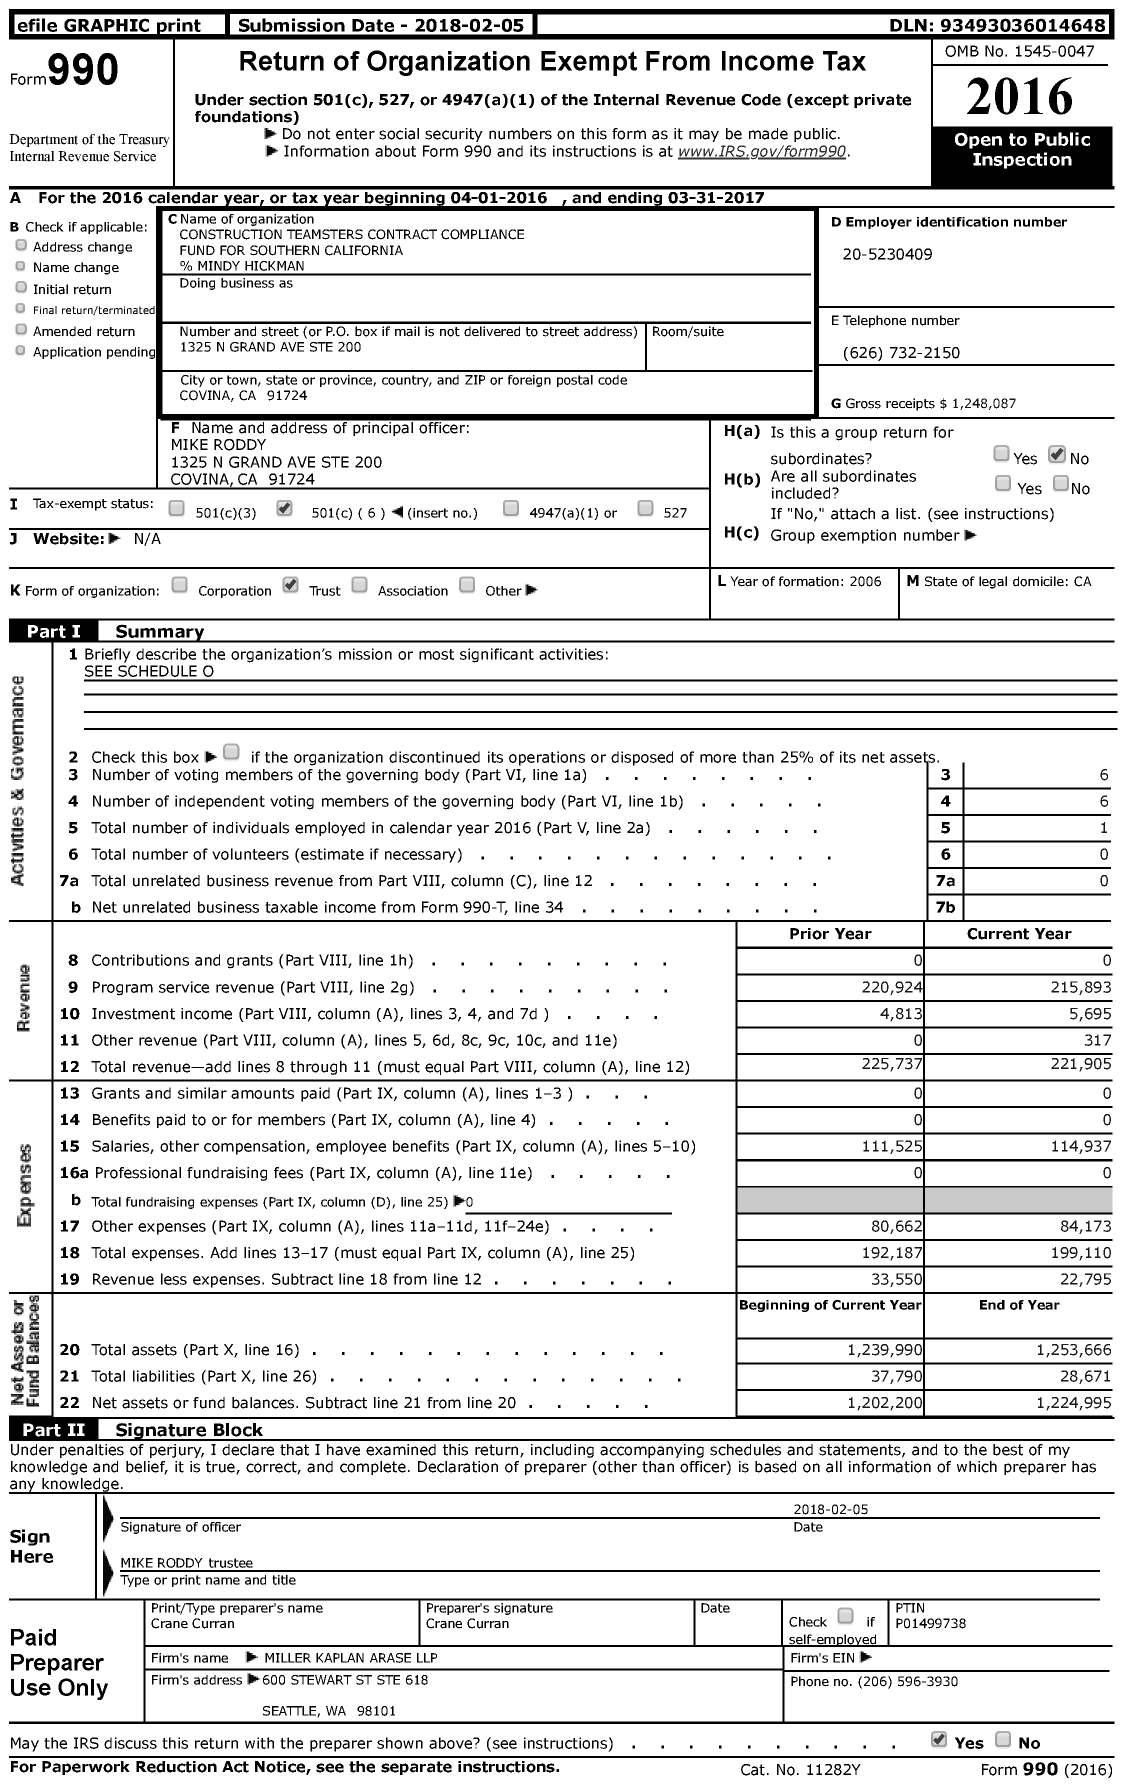 Image of first page of 2016 Form 990 for Construction Teamsters Contract Compliance Fund for Southern California